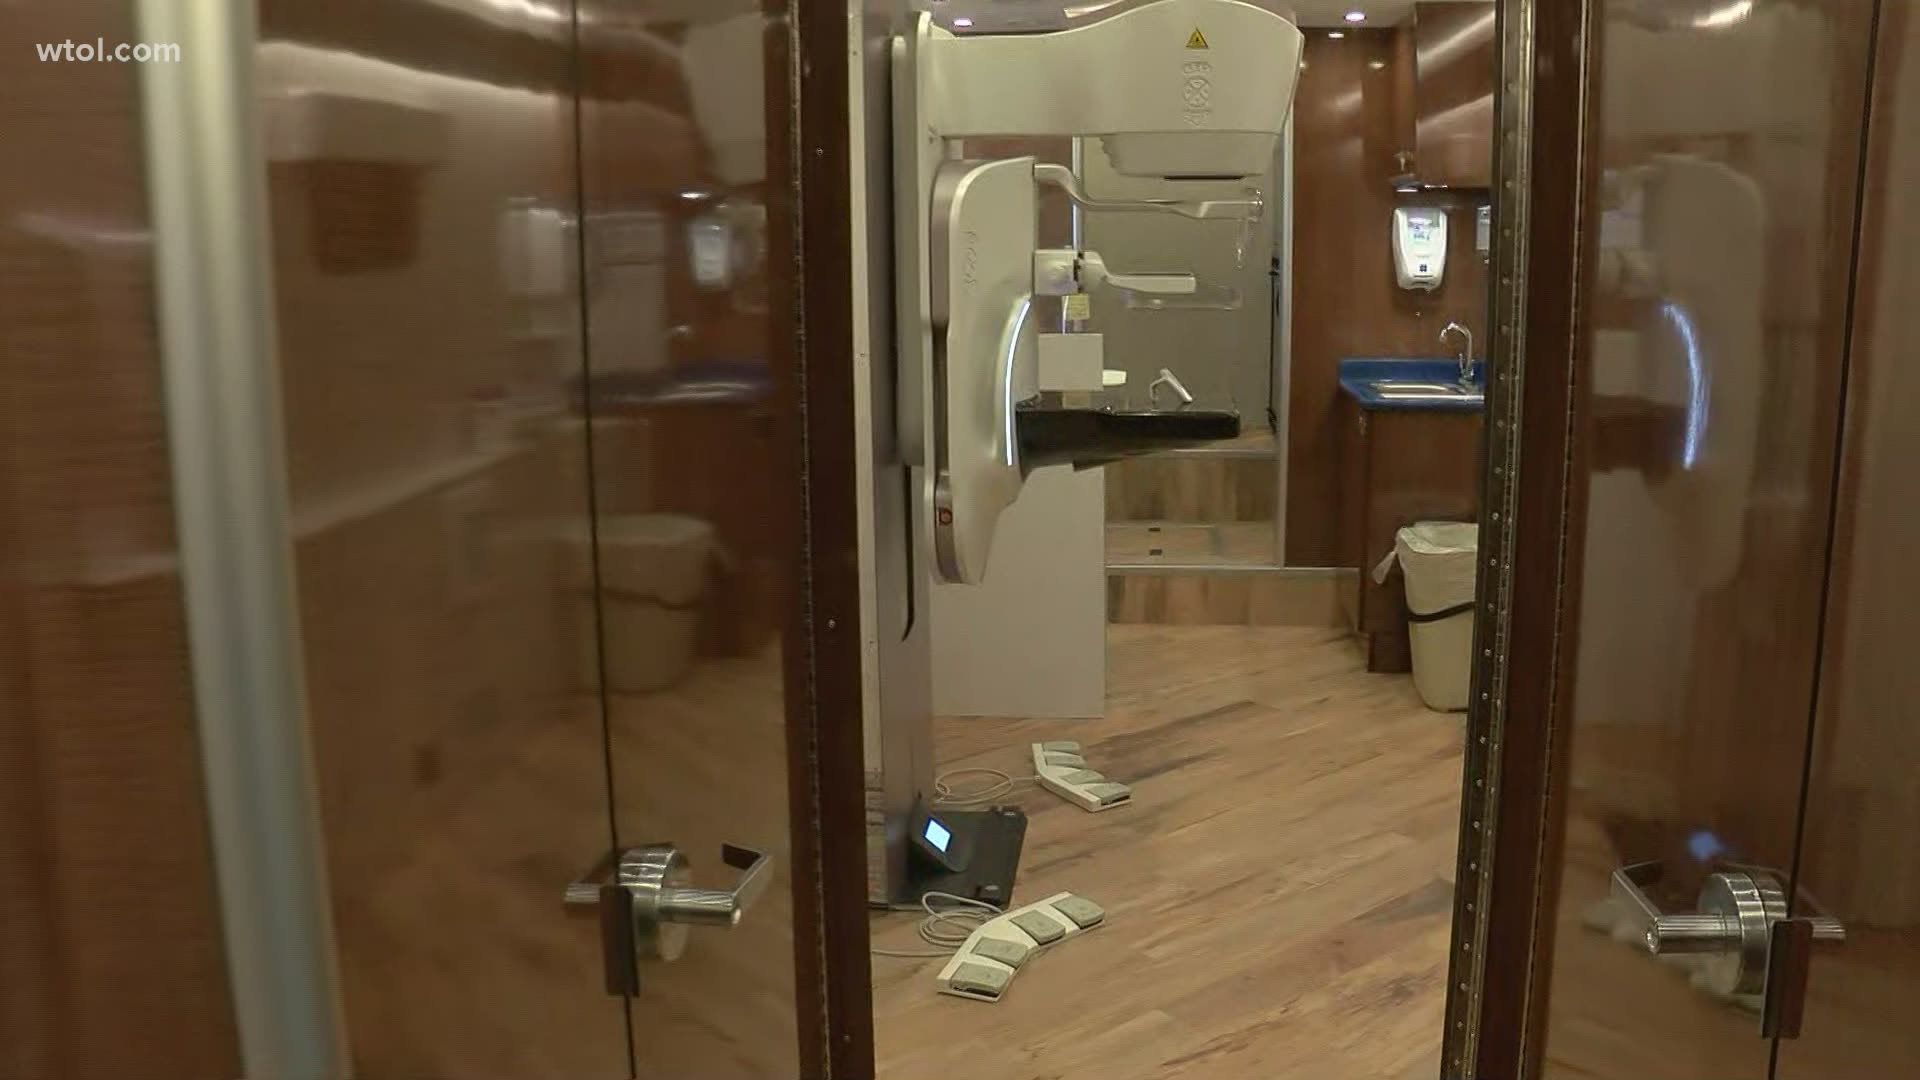 The mobile mammography unit is customized for patient convenience and will deliver 3D mammograms to women age 40 and older.